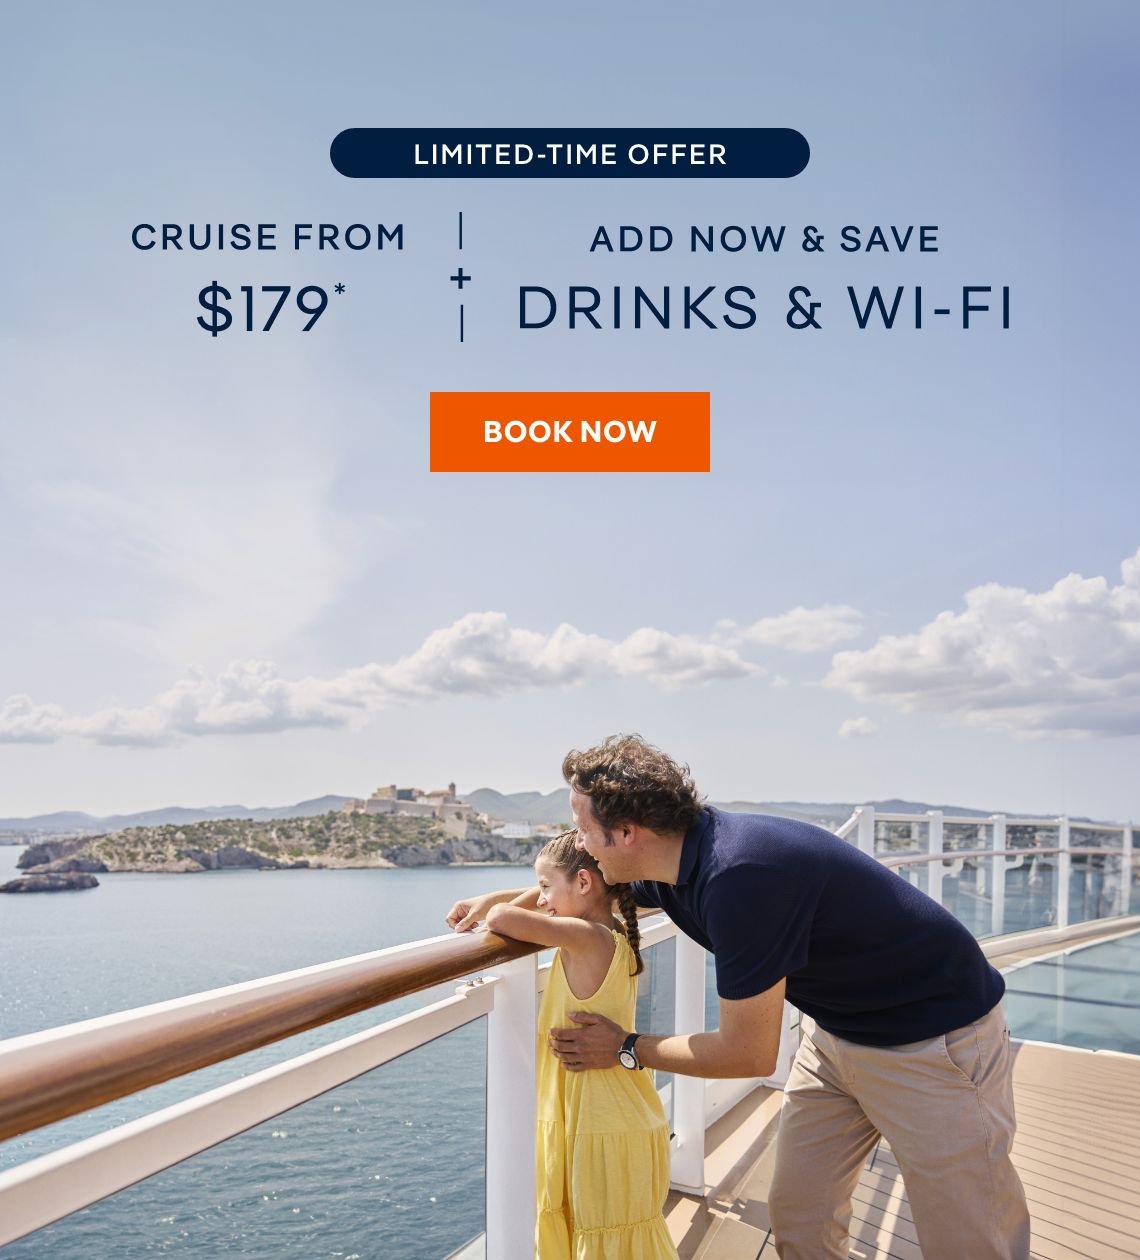 For a limited time, Cruise from $179, plus add Drinks & Wi-Fi now and save versus purchasing separately